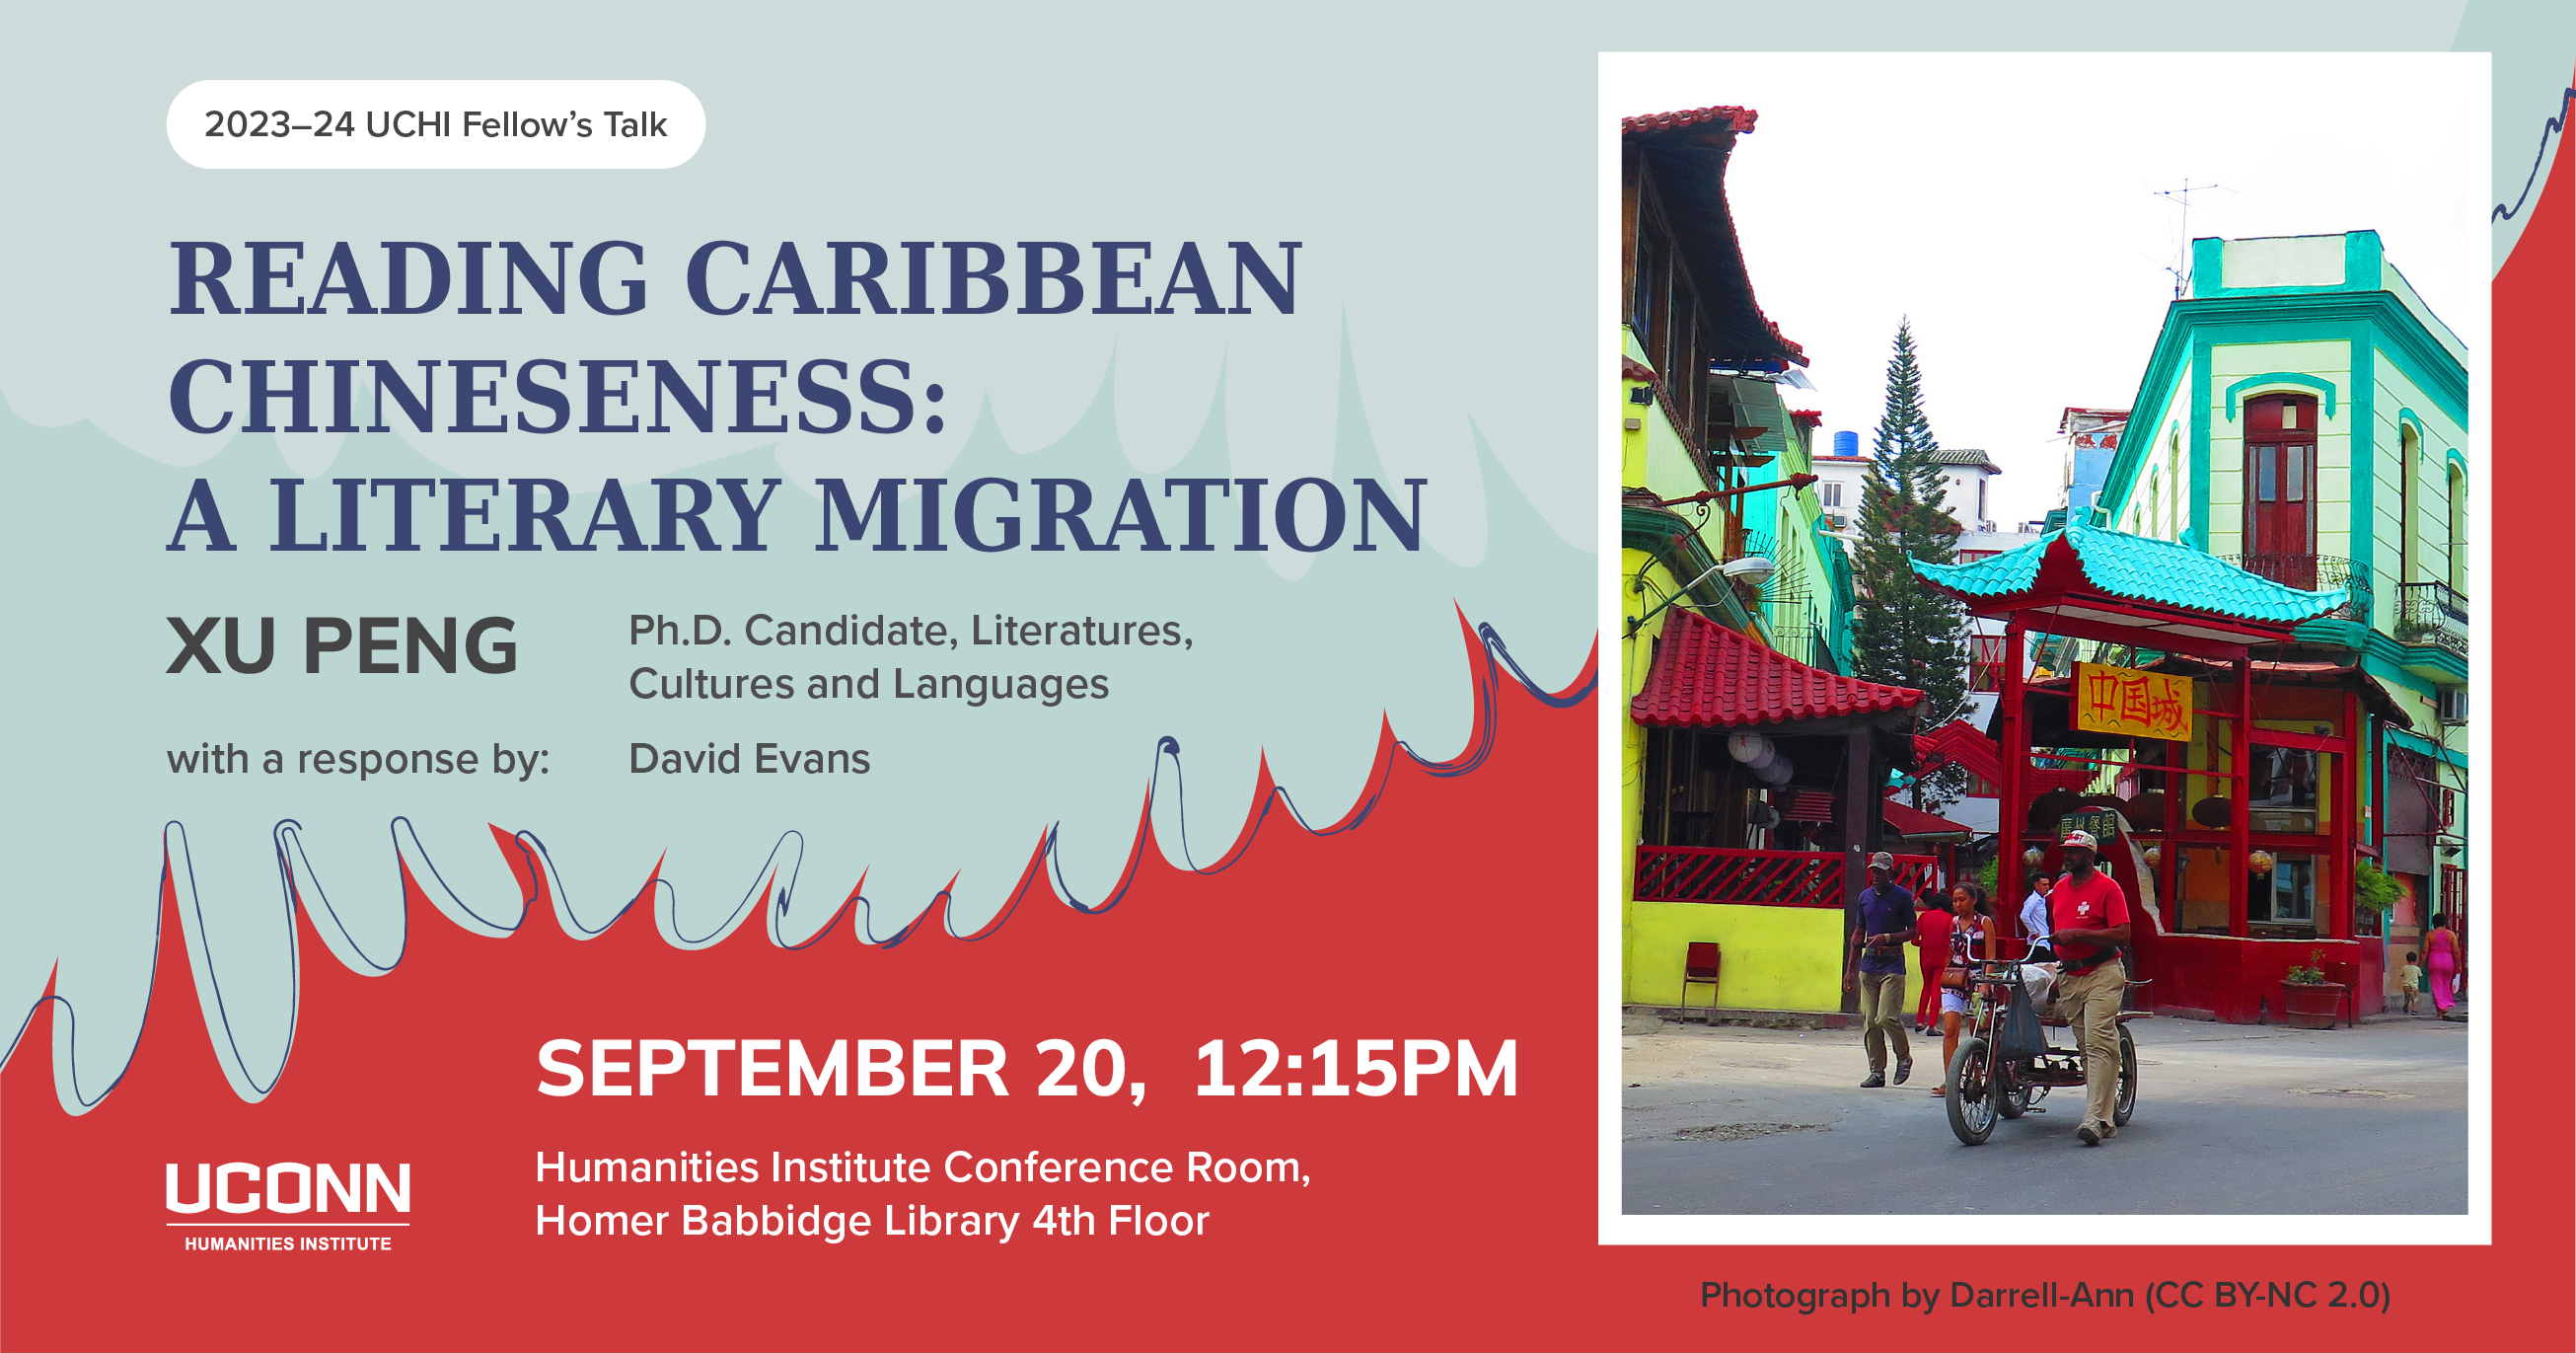 2023–24 Fellow's Talk. Reading Caribbean Literature: A Literary Migration. Xu Peng, Ph.D. Candidate, Literatures, Cultures, and Languages. with a response by David Evans. September 20, 12:15pm. Humanities Institute Conference Room, Homer Babbidge Library, 4th Floor.